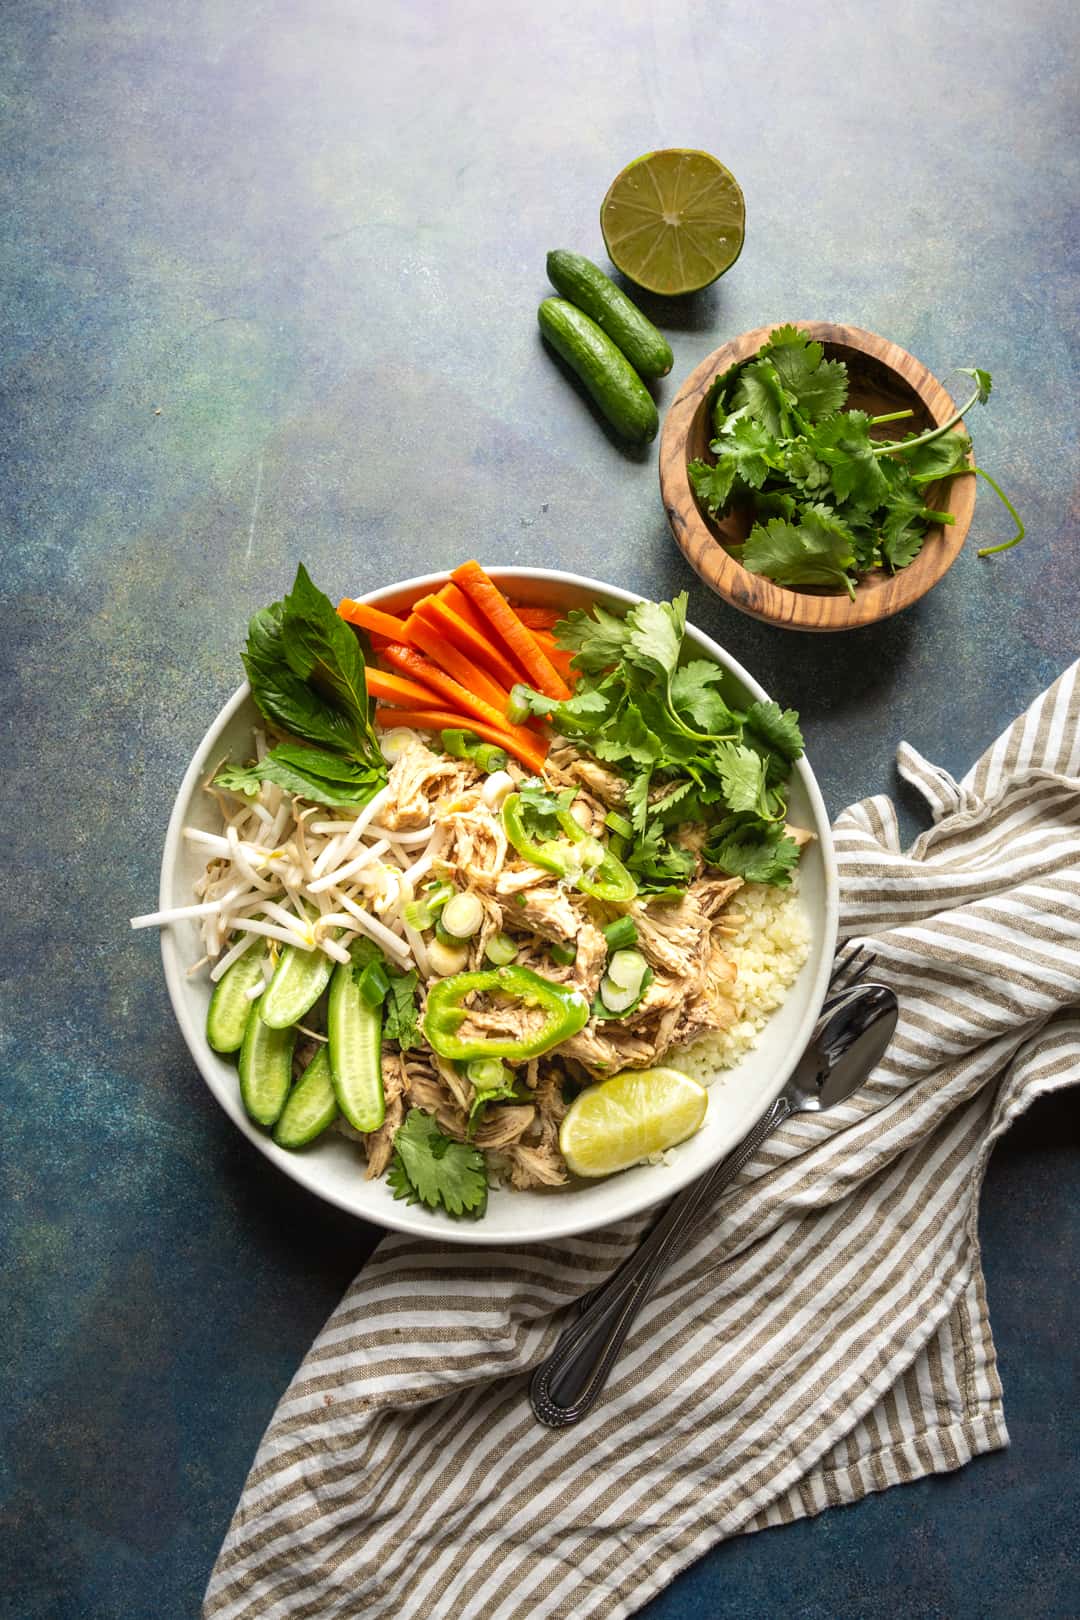 five spice chicken bowl with carrots and cucumbers